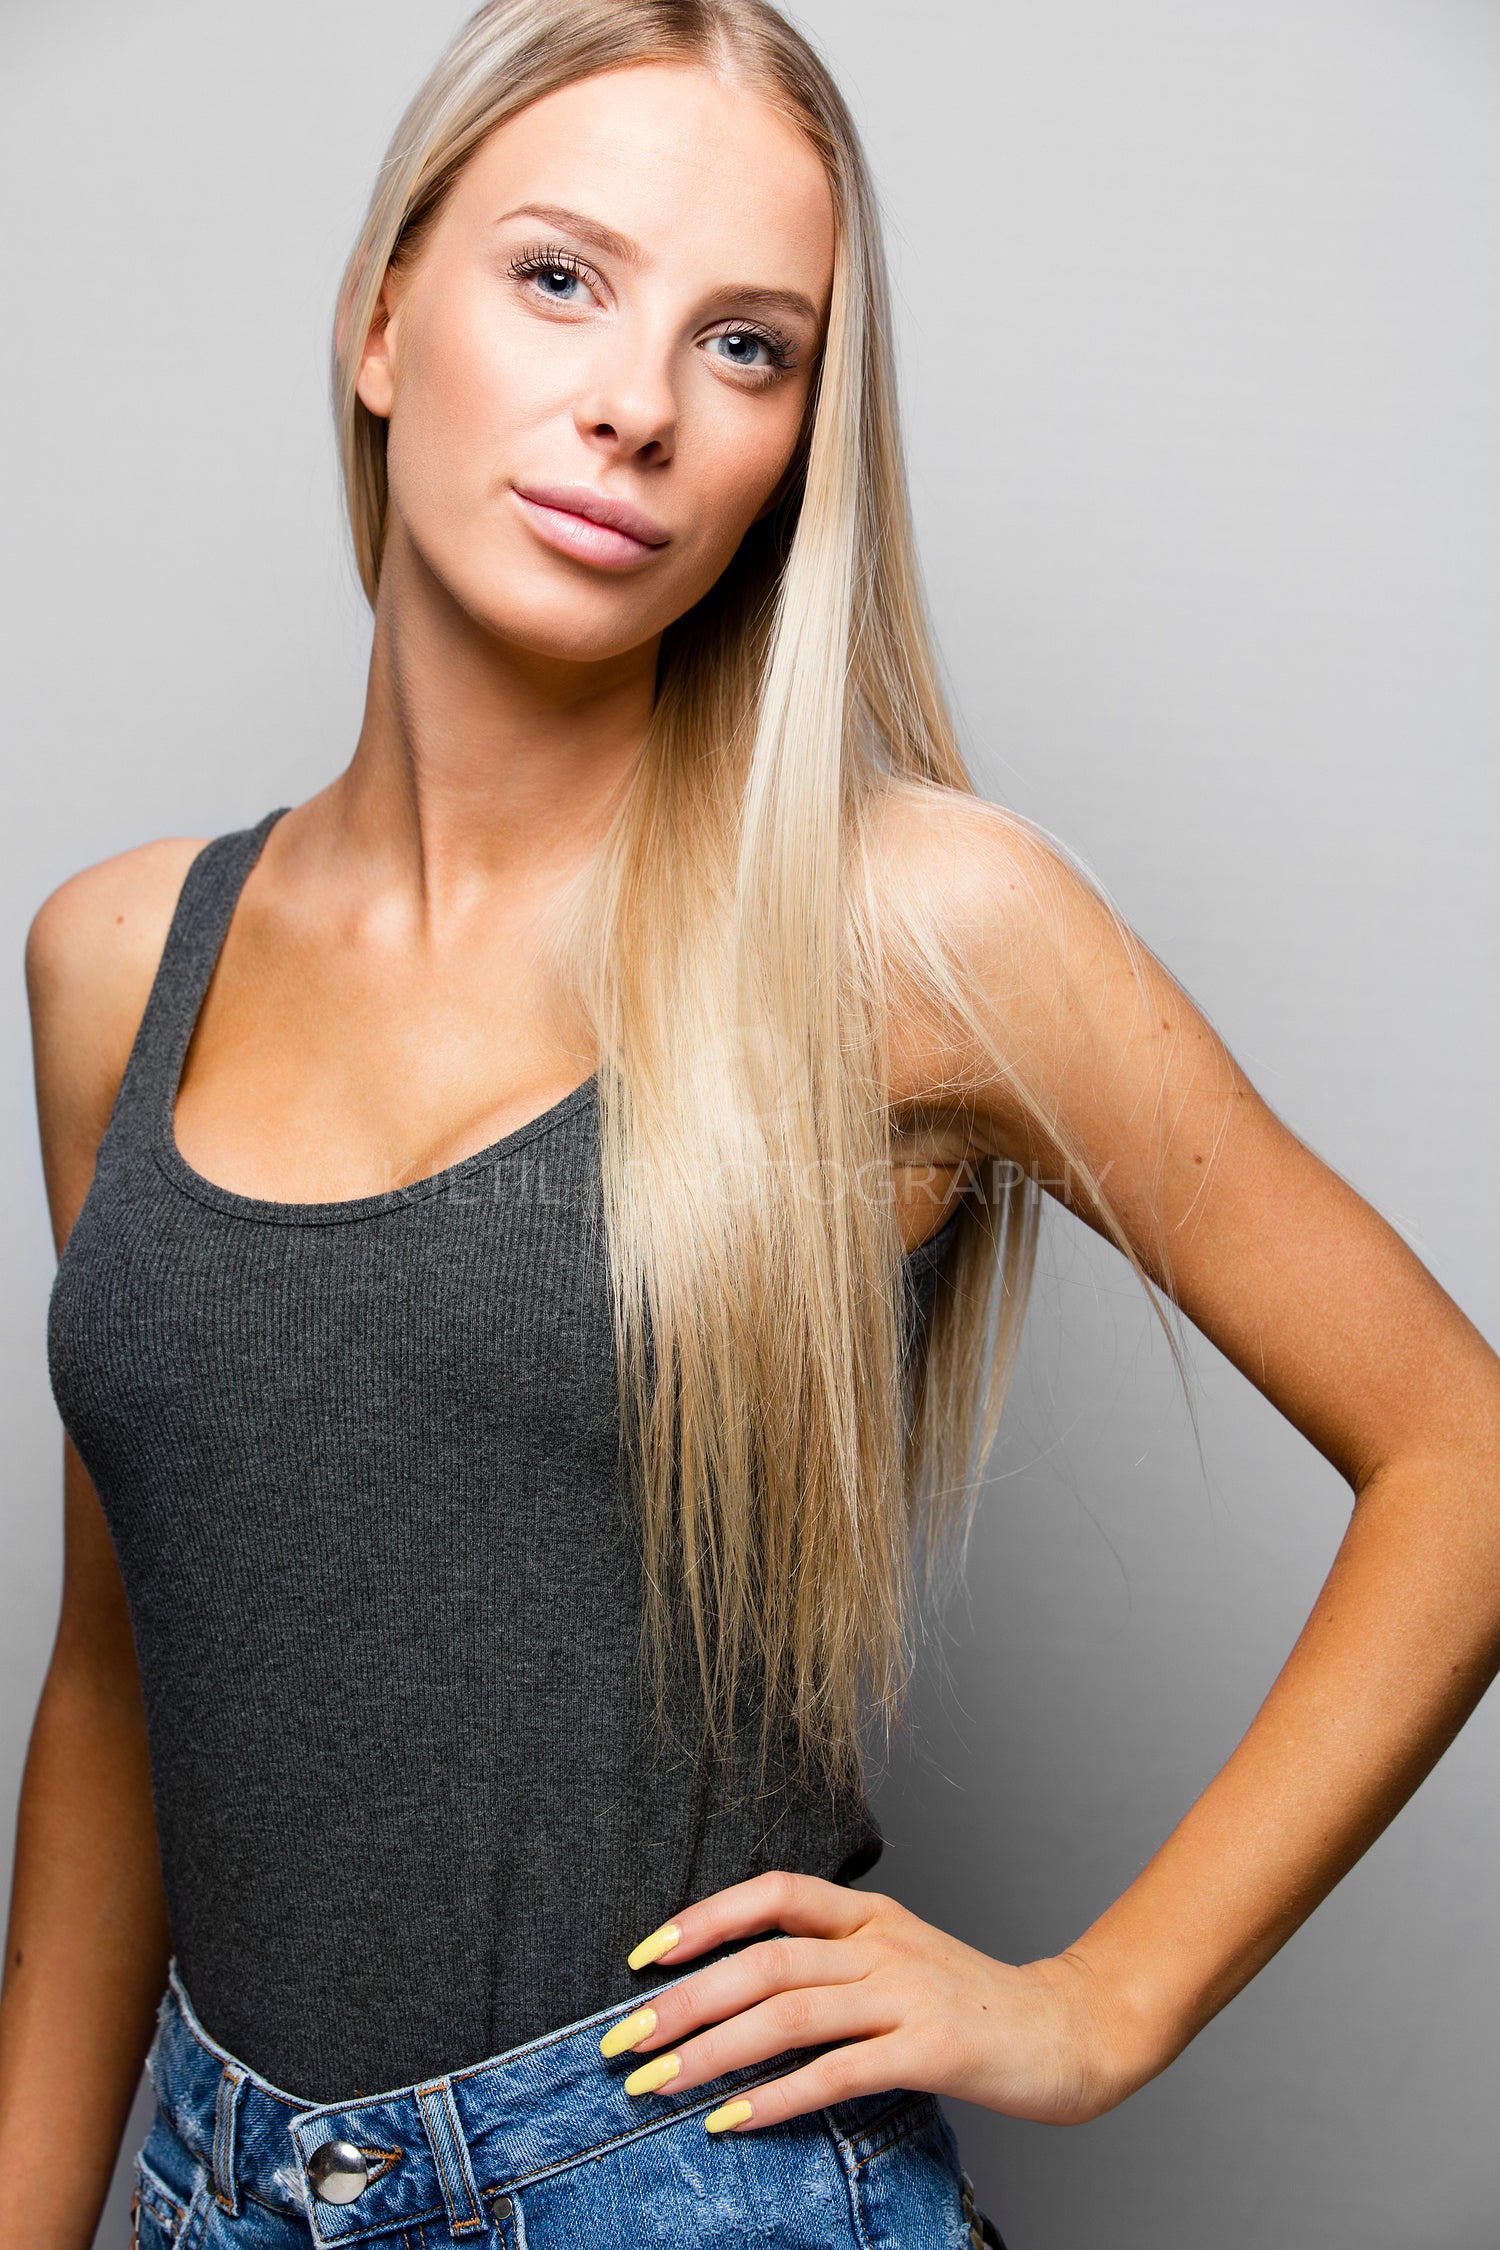 Fashion portrait of a confident and blonde young woman